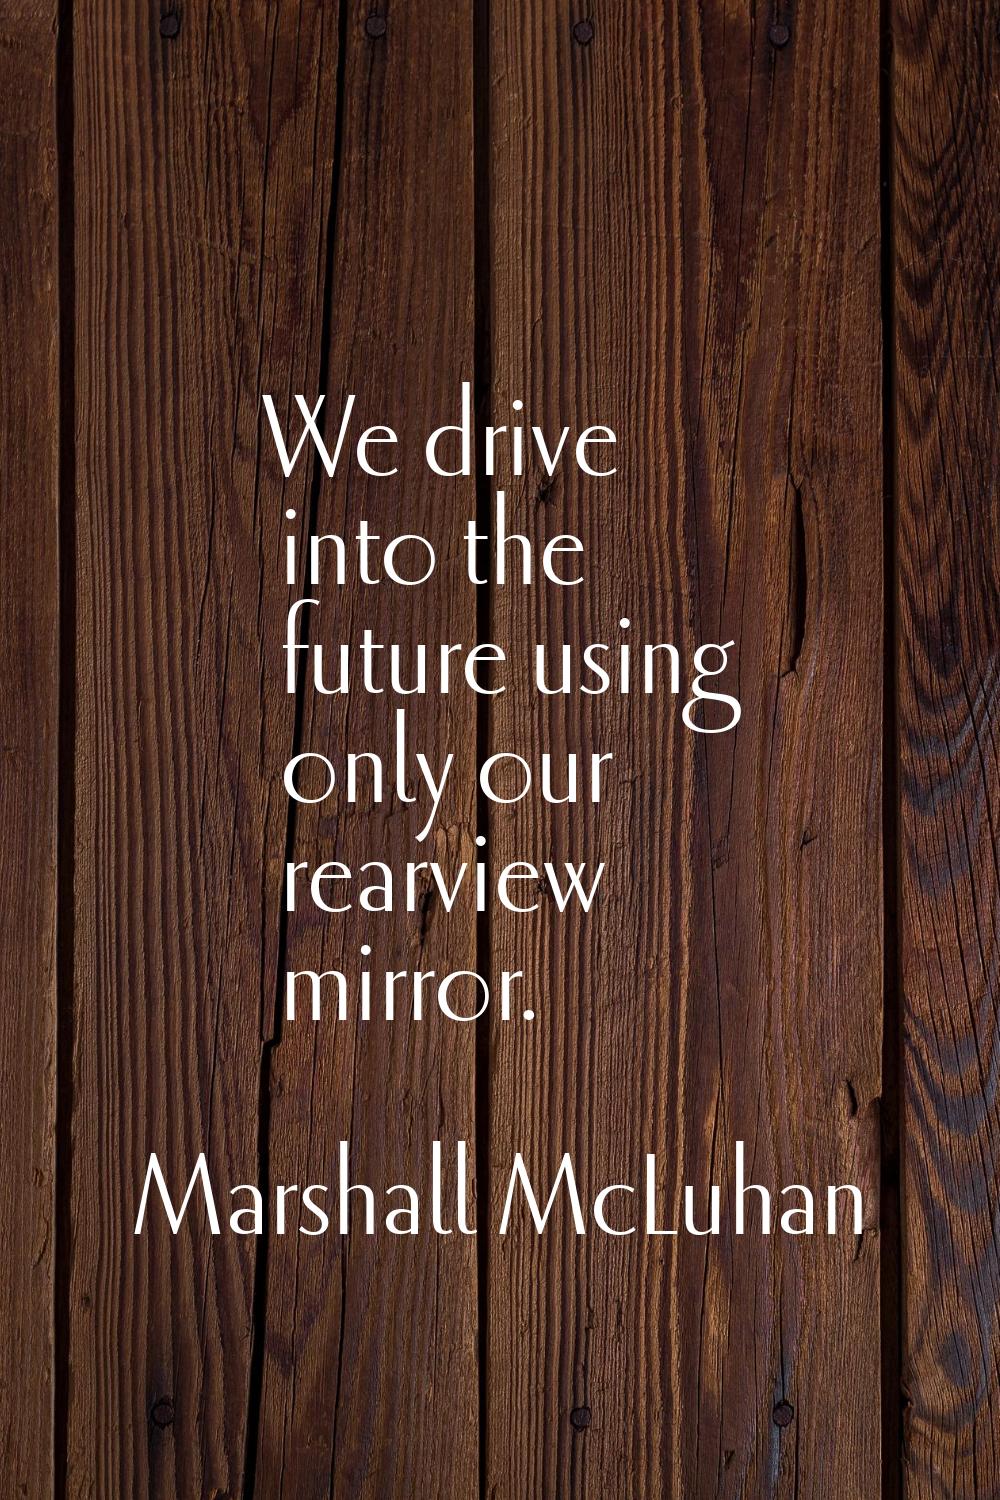 We drive into the future using only our rearview mirror.